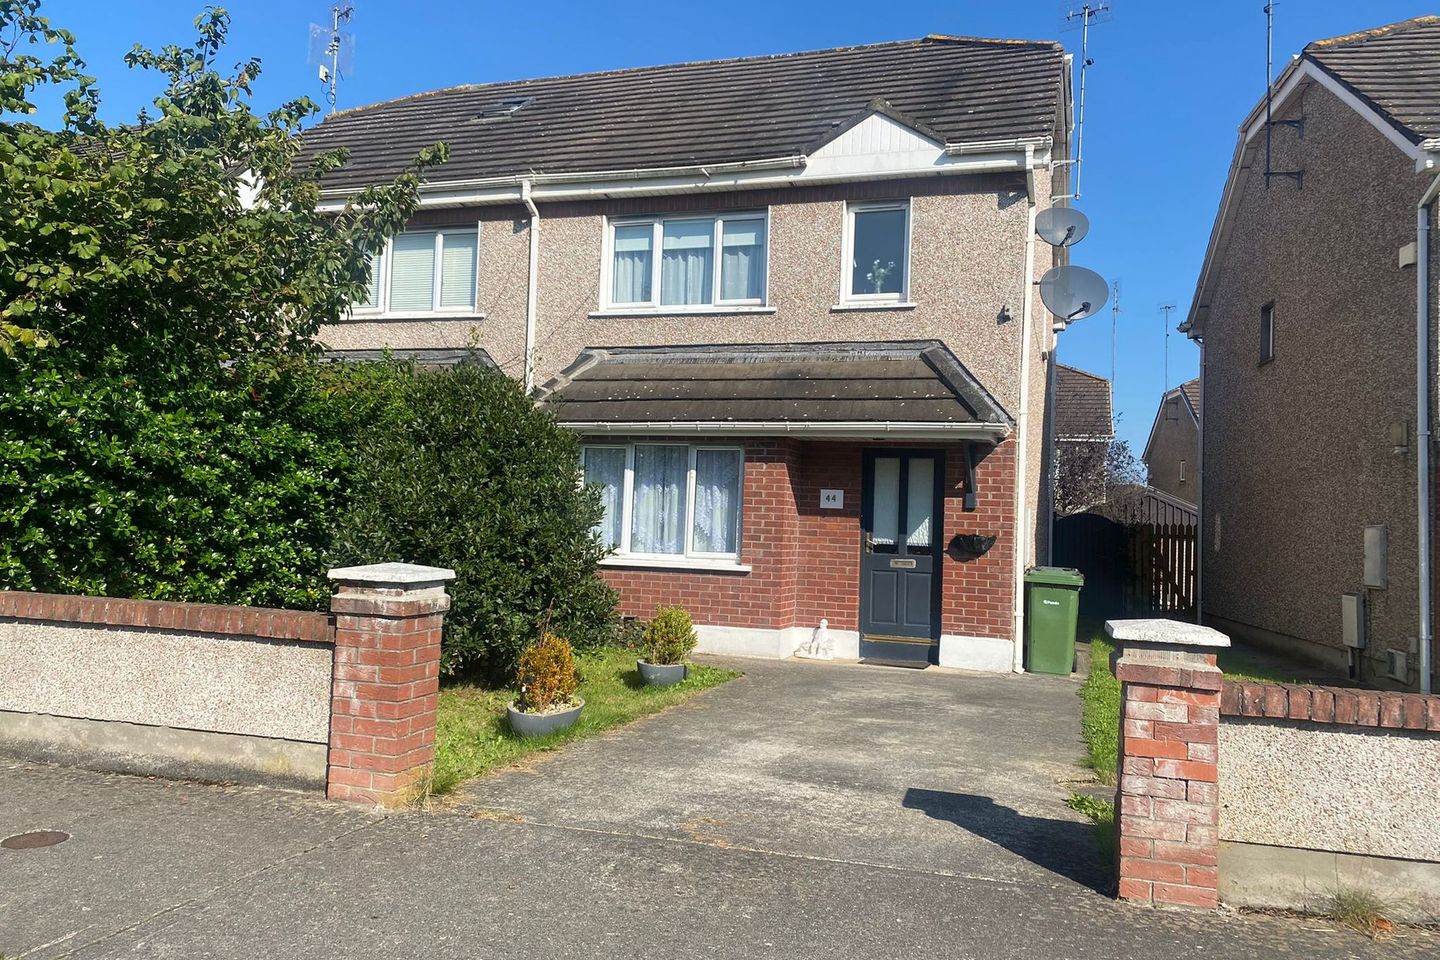 44 Beechwood Close, Termon Abbey, Drogheda, Co. Louth, A92A2PR